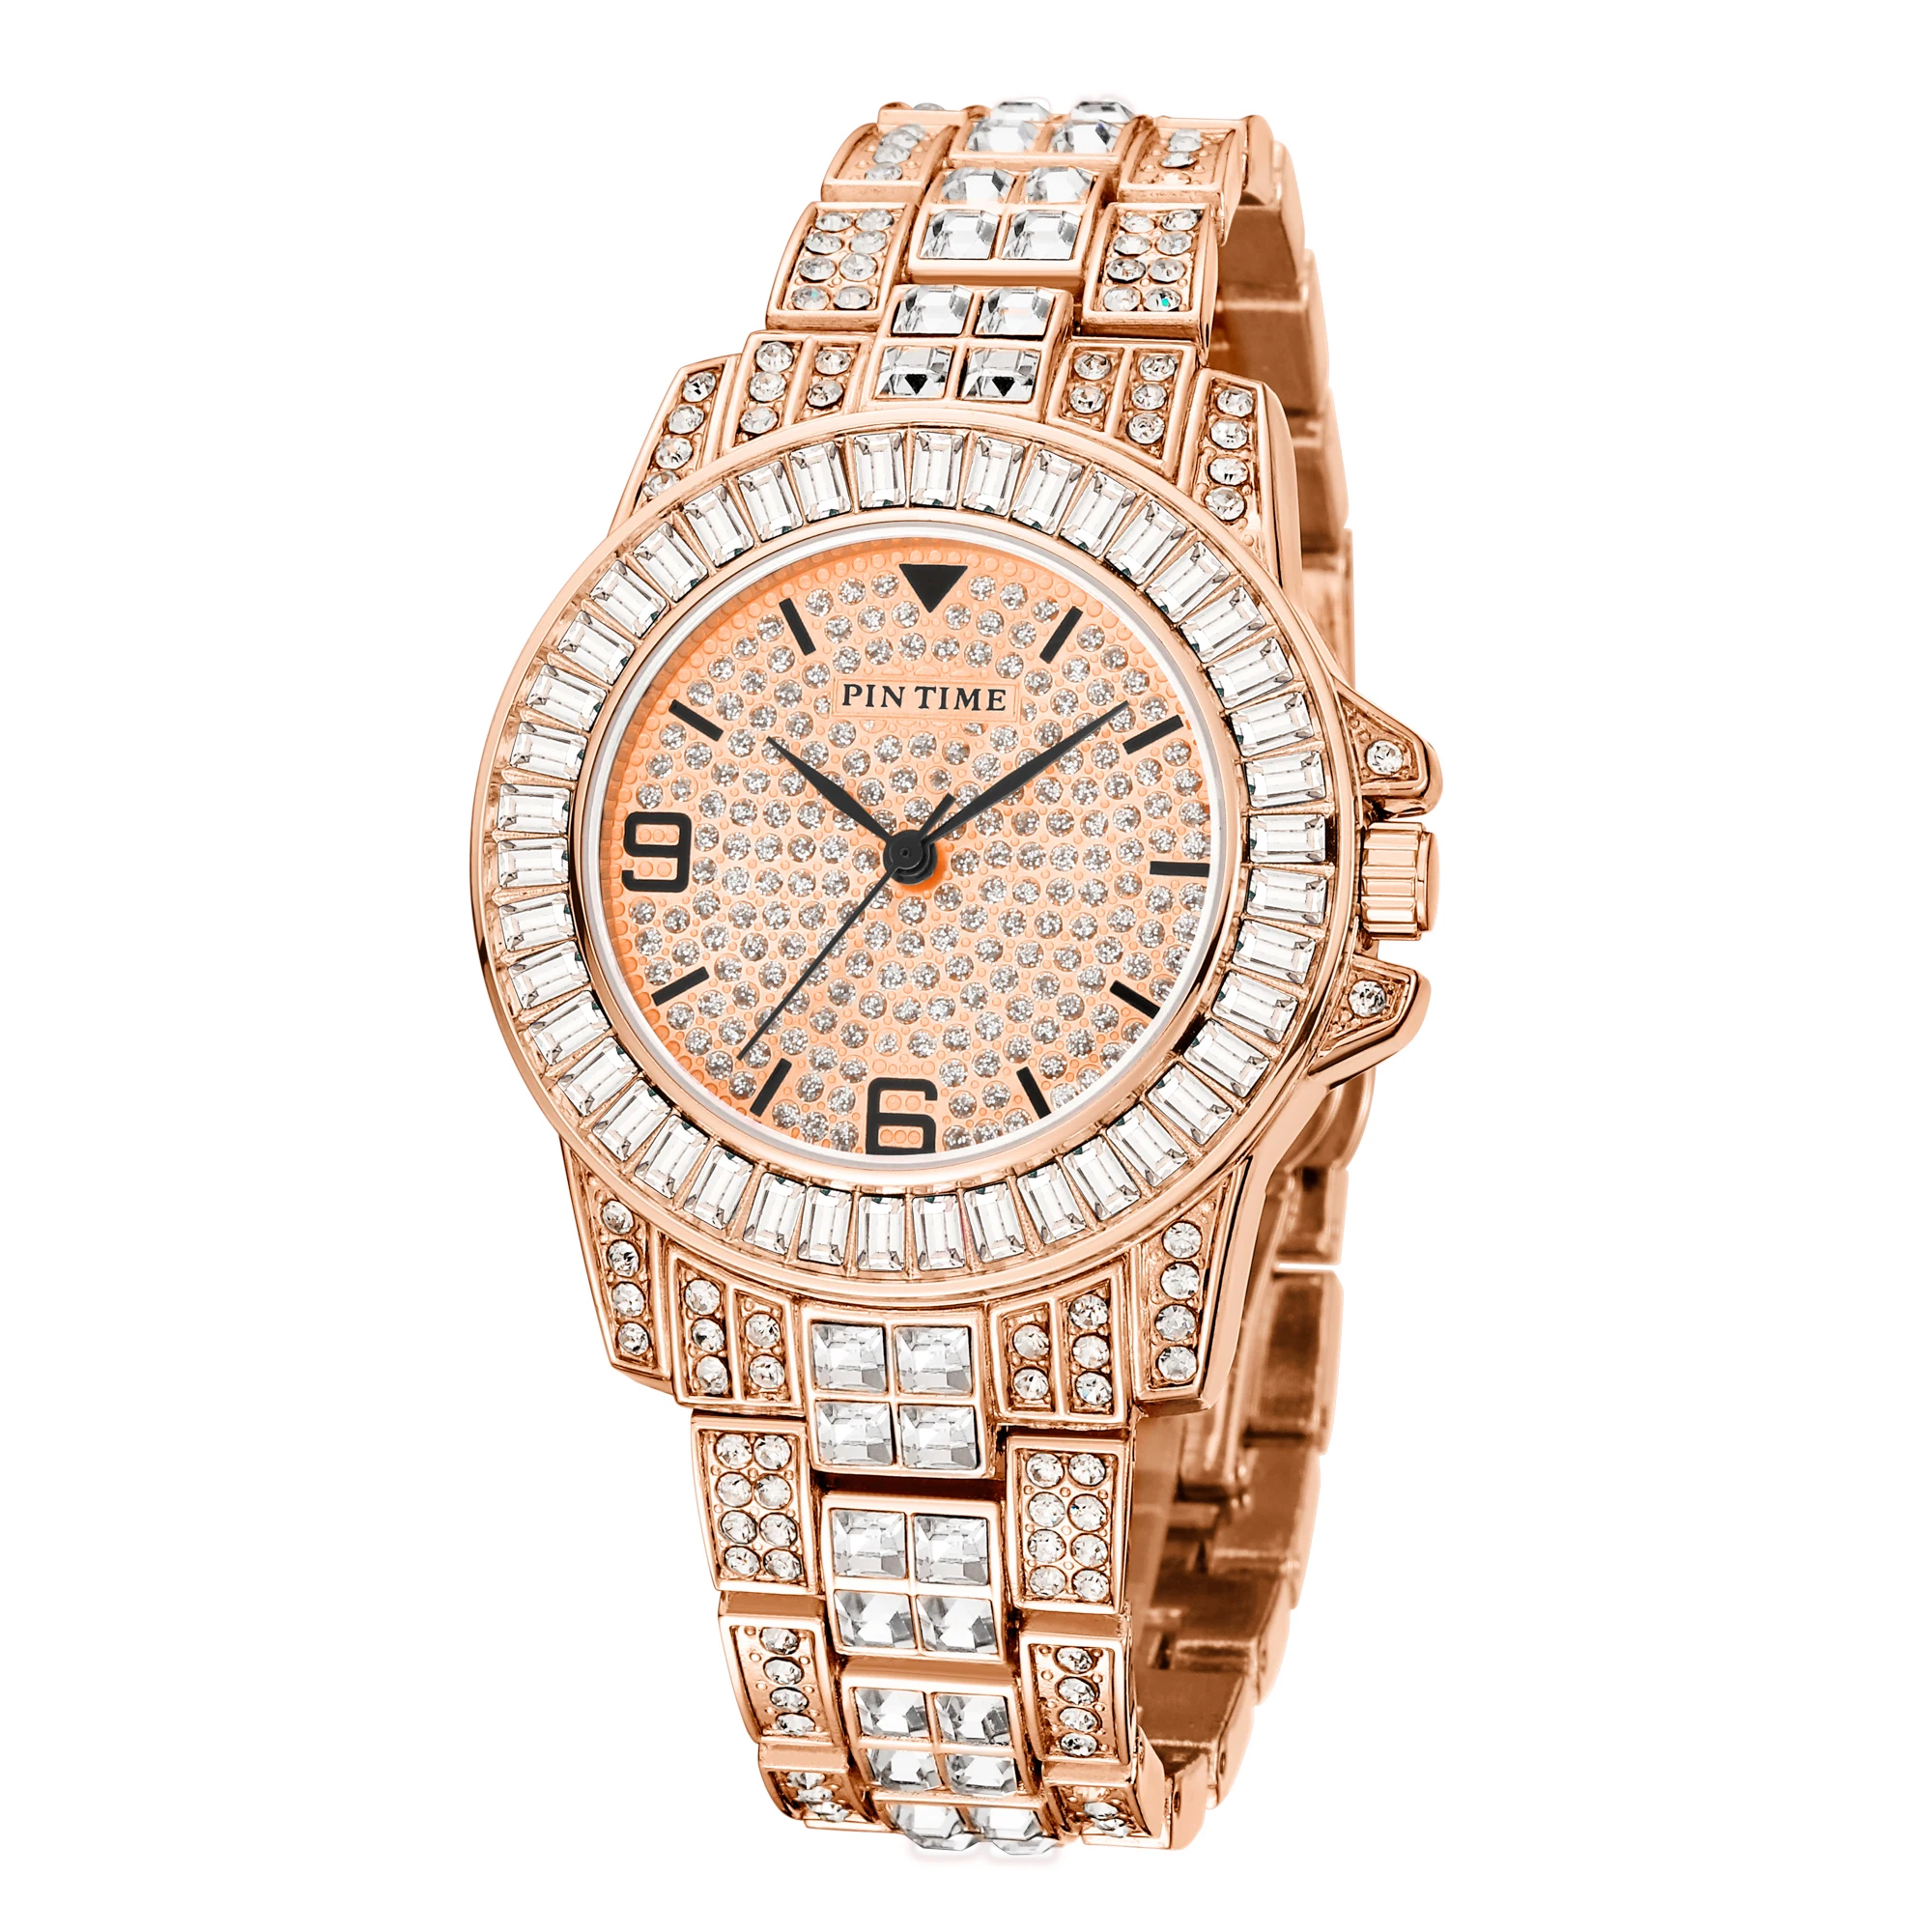 New Style Men Women Luxury Diamond Rose Gold Watch Iced Out Baguette Shinning Quartz Wristwatch Casual Dress Party Clock Montre magician clock prop writable paper clock easy to clean funny tricks gimmicks casual tricks accessories for street party